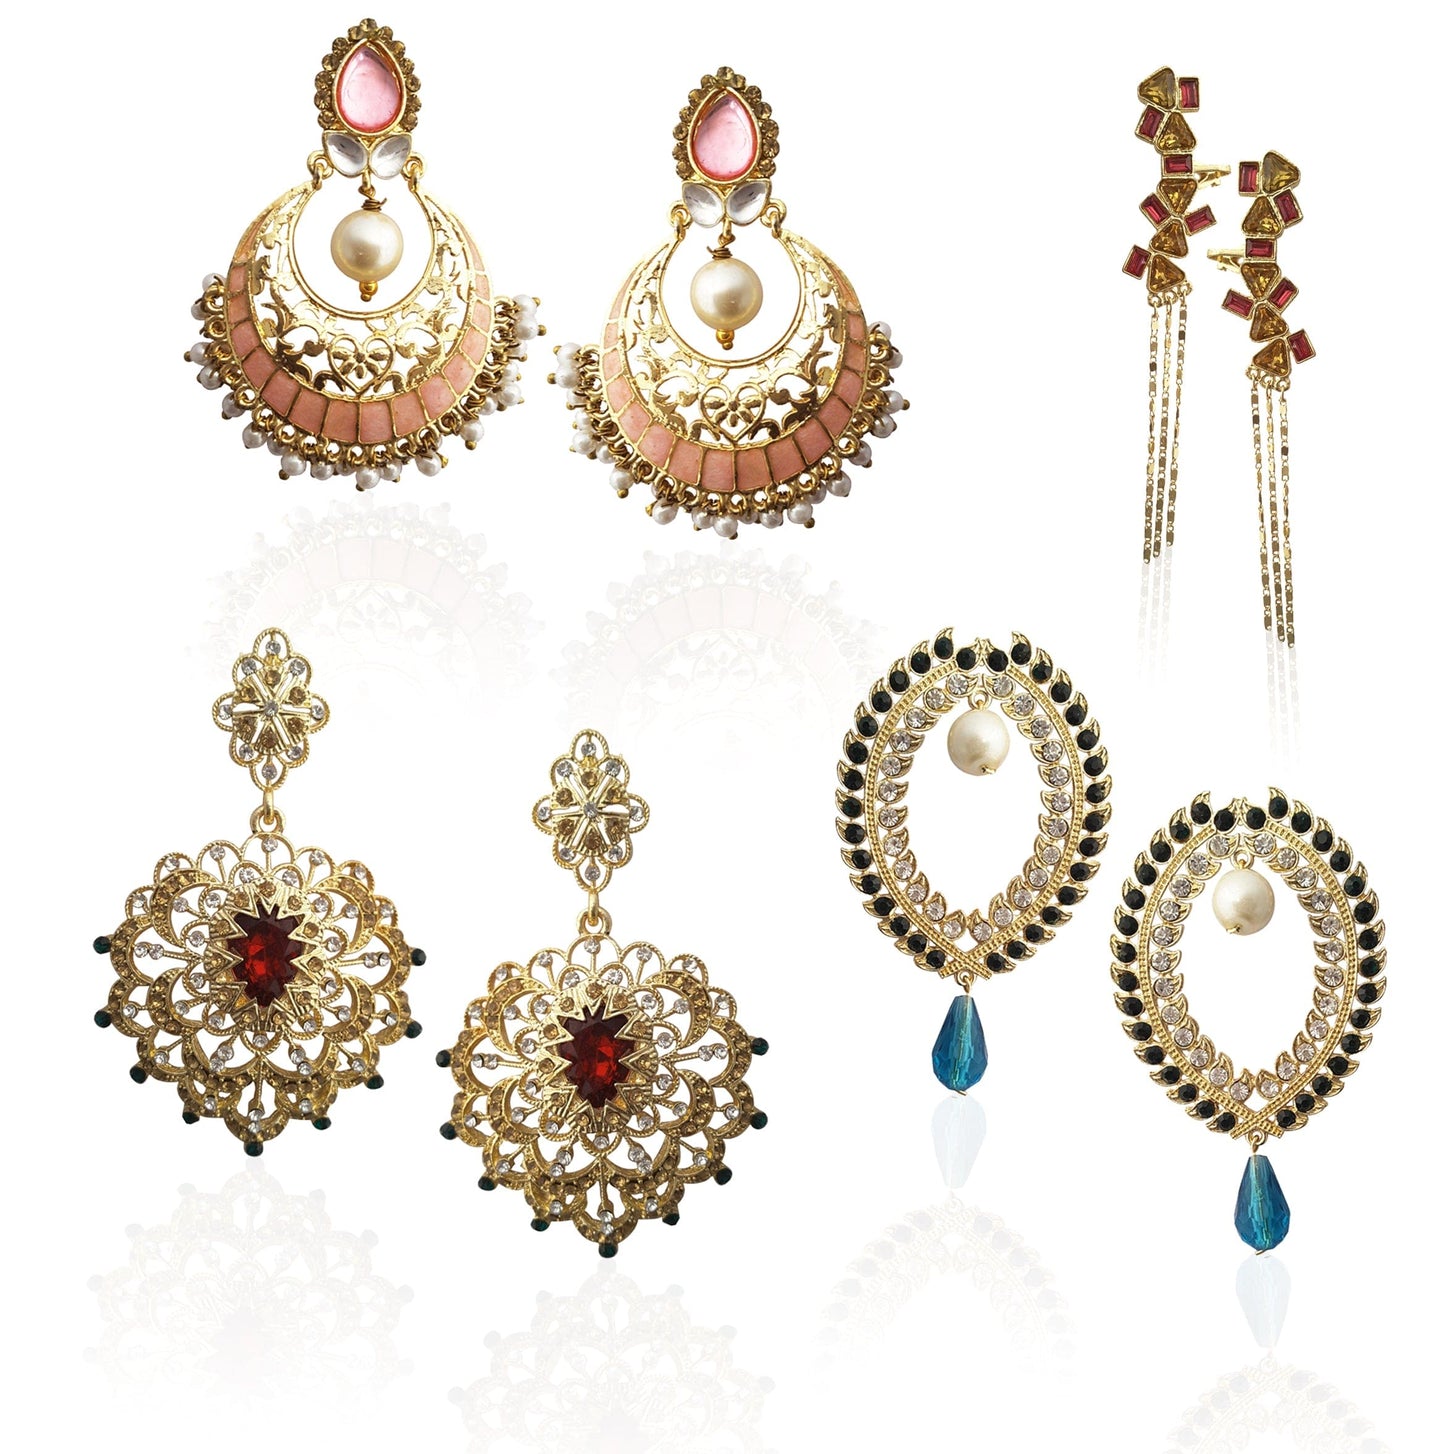 Moonstruck 15 Pairs Of Fashion Earrings Combo For Women Western & Traditional (Multicolour) - www.MoonstruckINC.com